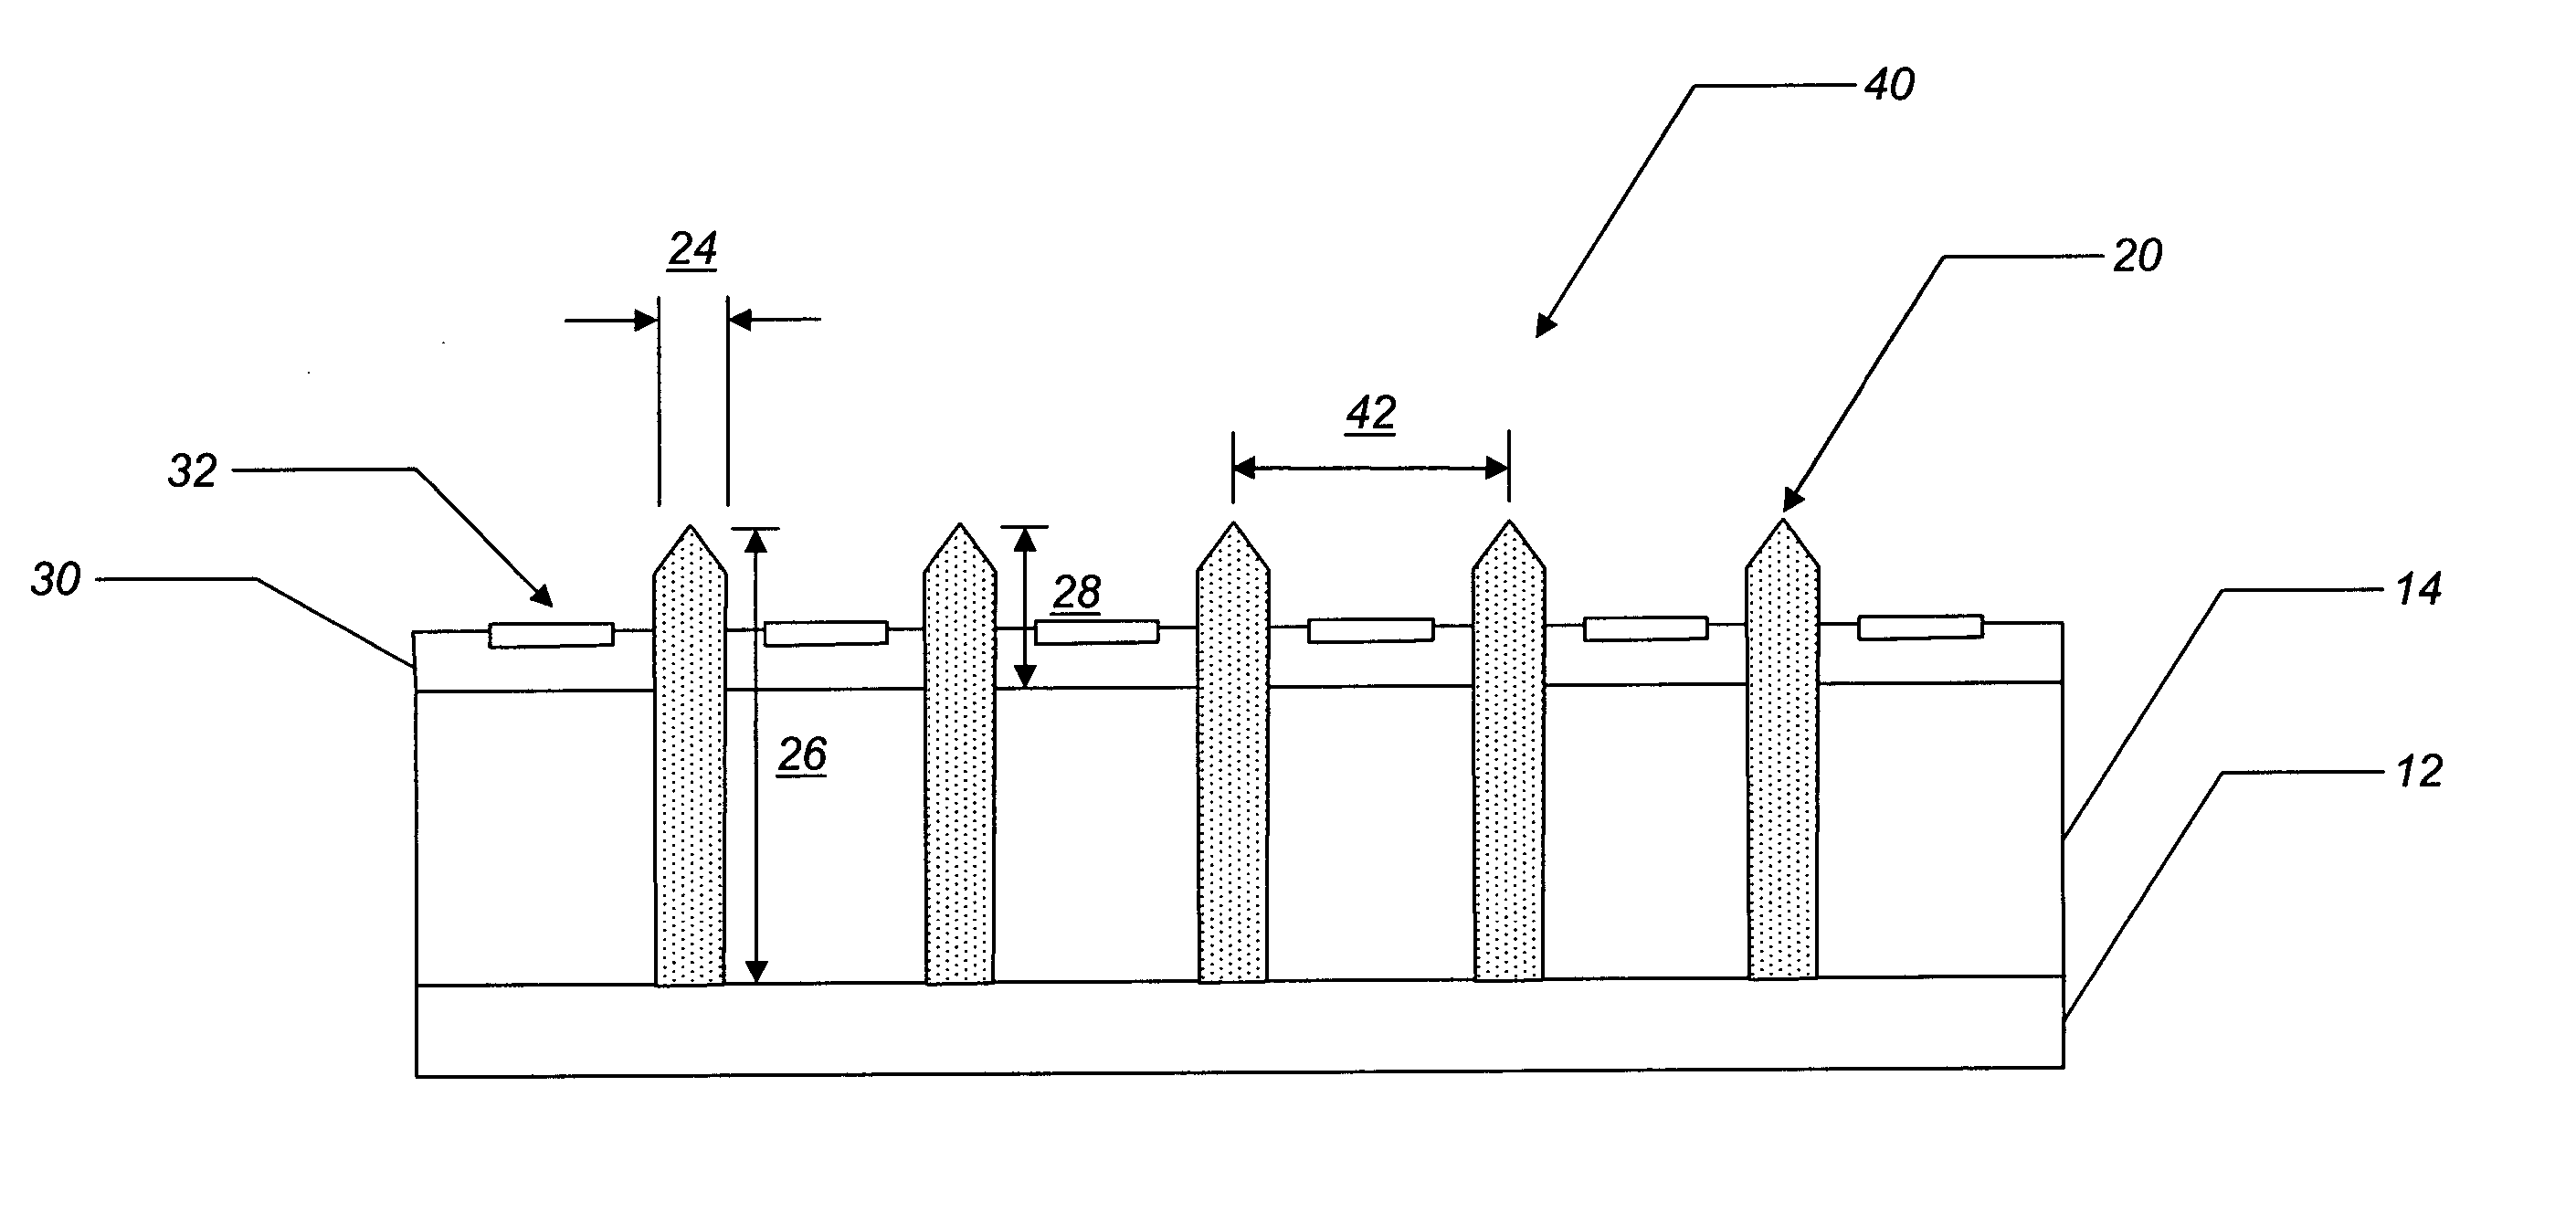 Self-aligned gated rod field emission device and associated method of fabrication